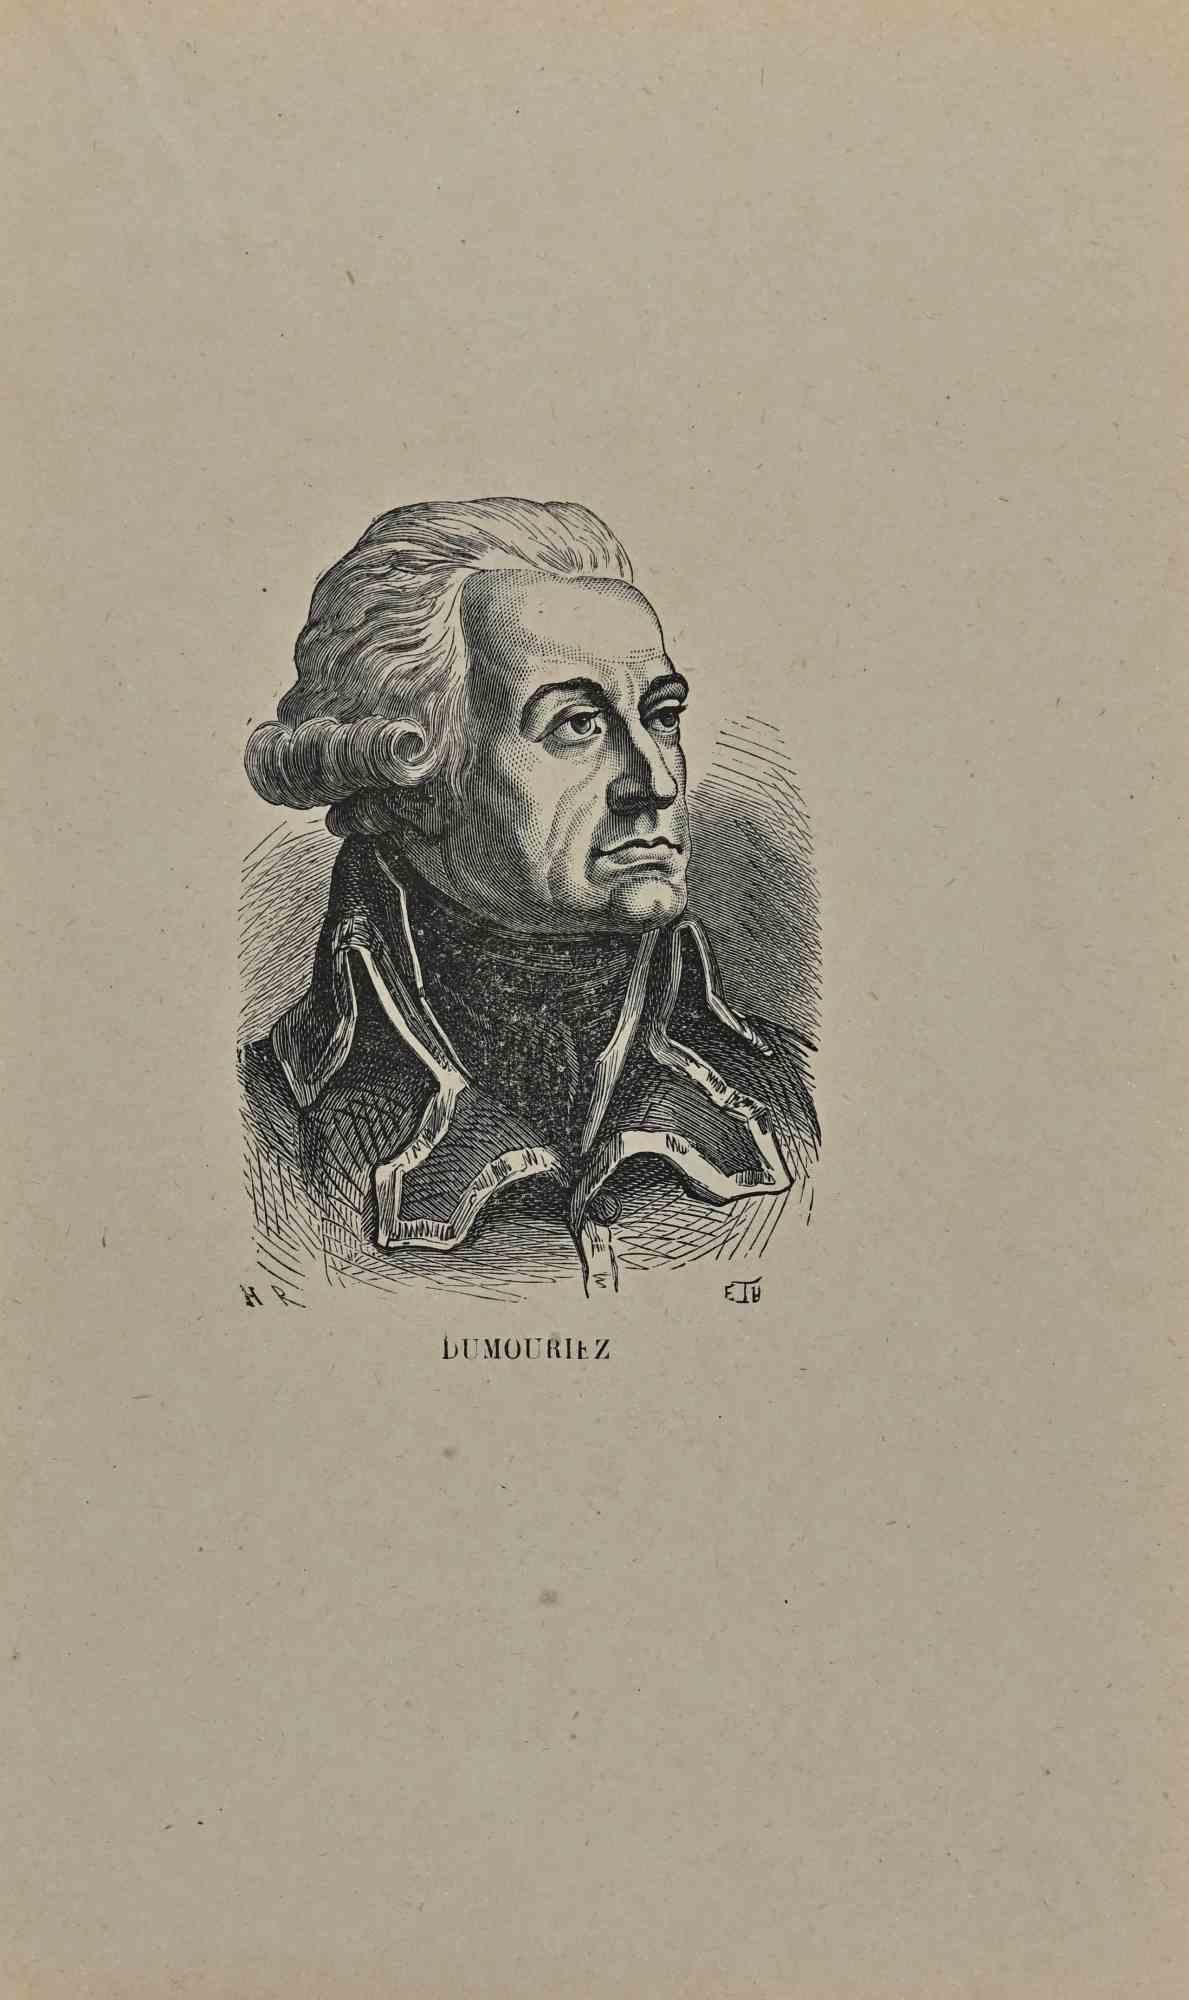 Unknown Figurative Print - Portrait of  Dumouriez - Lithograph - Early 19th century